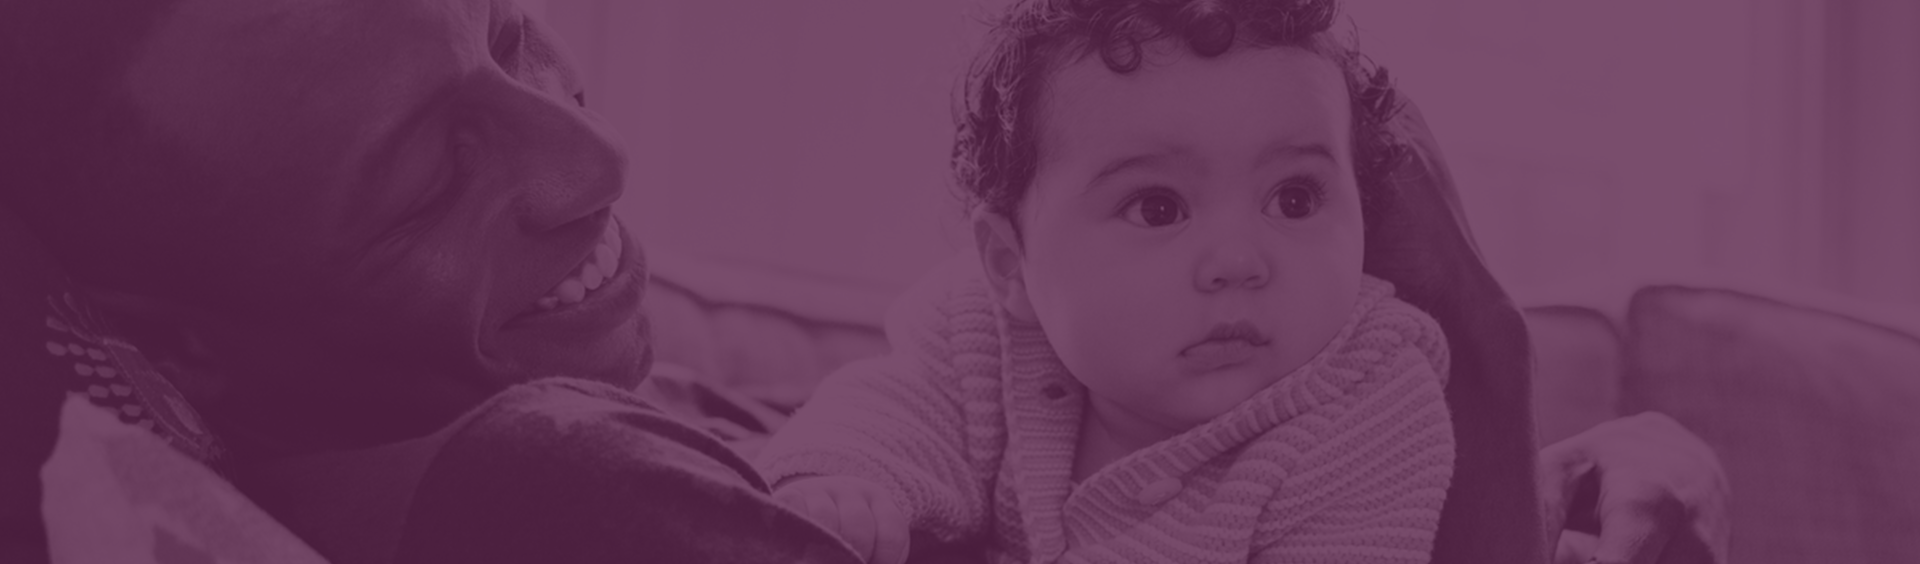 smiling father holding baby on a purple background